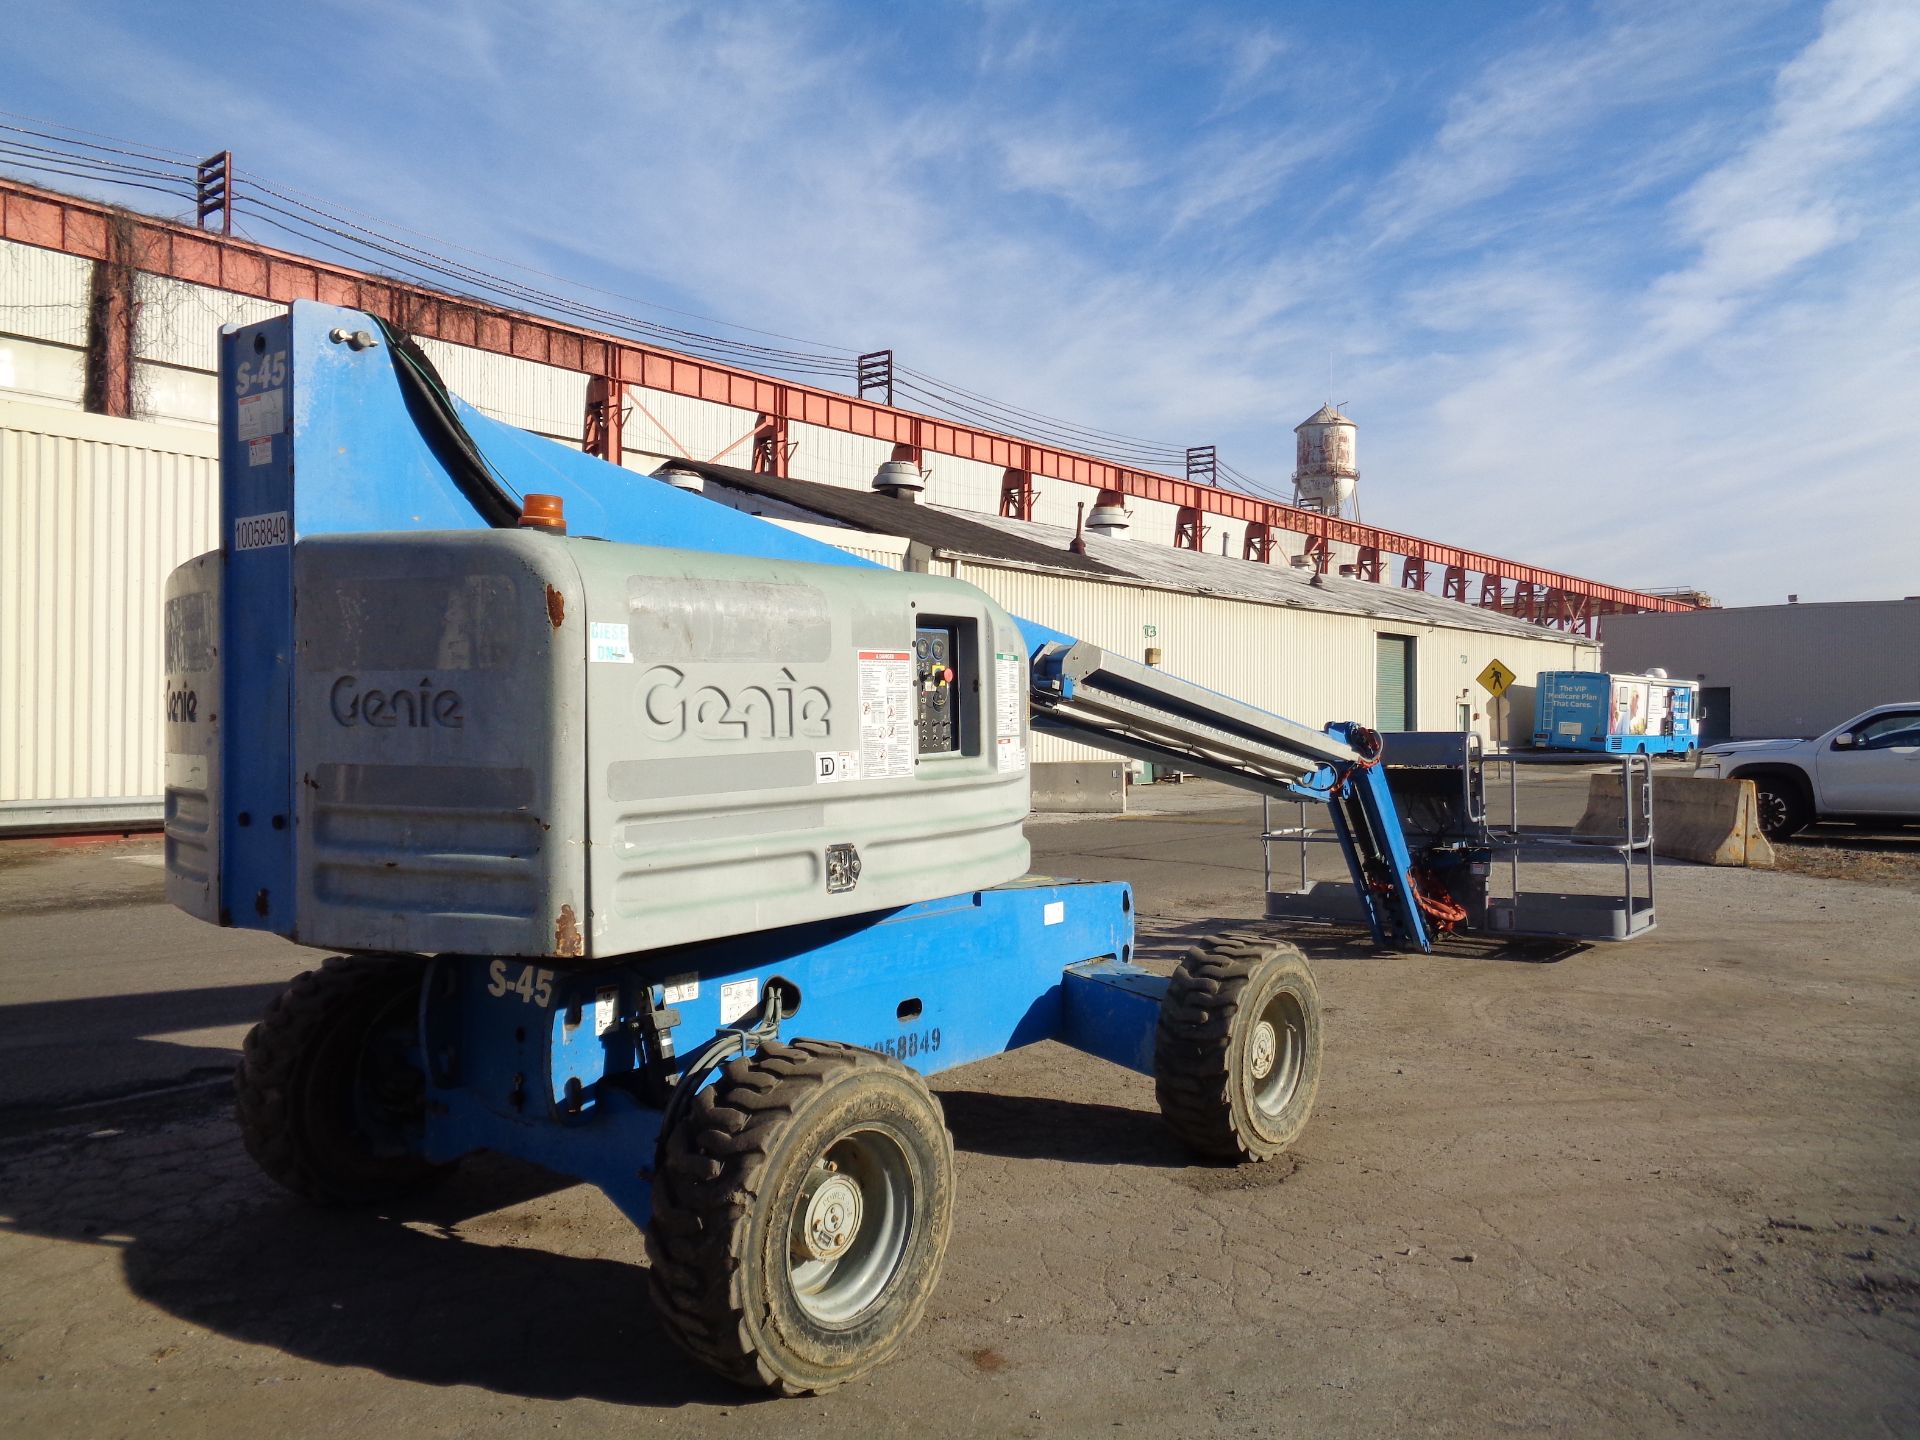 2012 Genie S45 Boom Lift 45Ft Height - Image 3 of 15